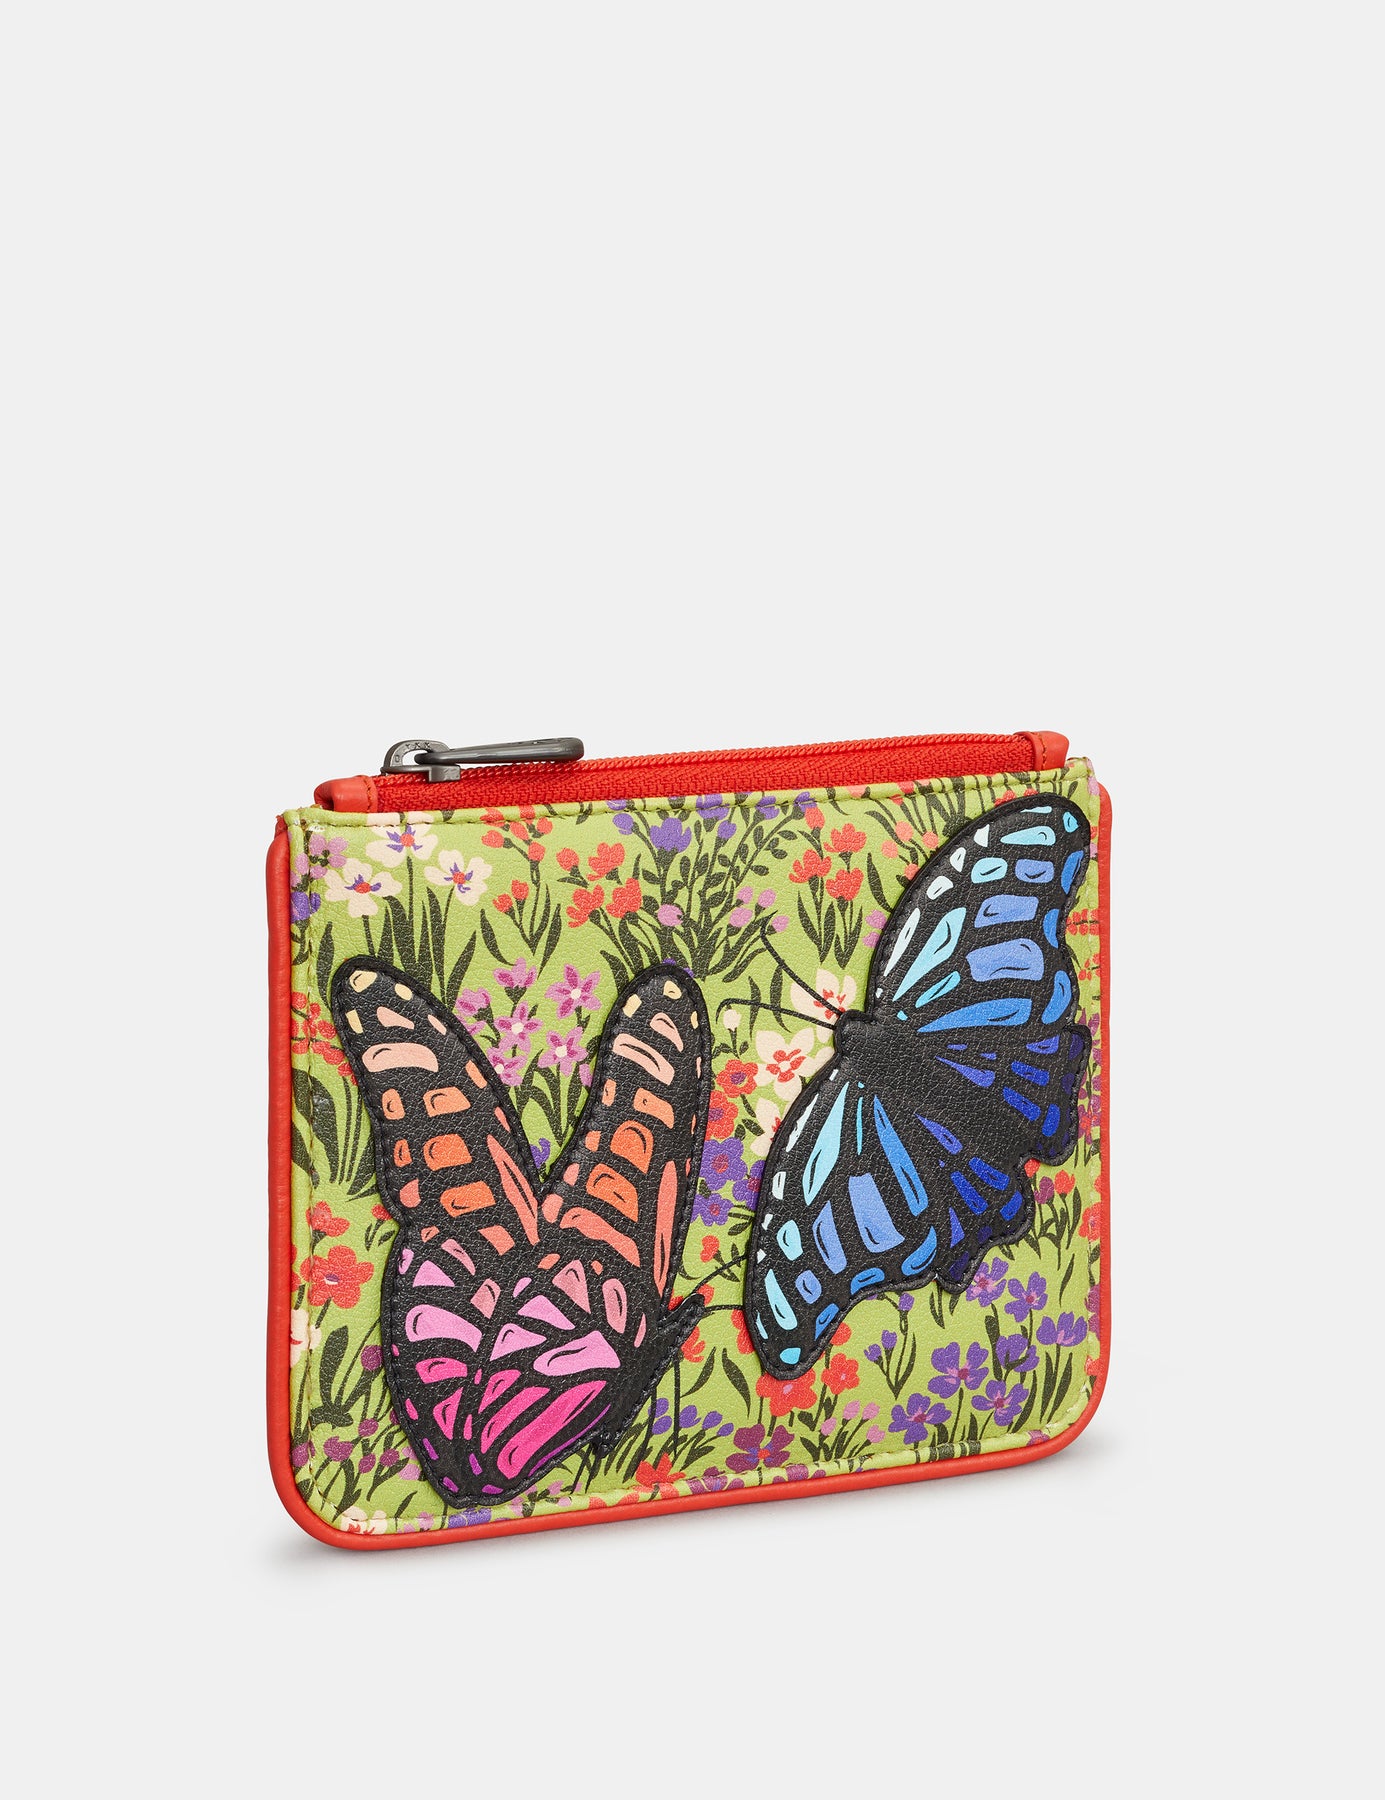 Amazon.com : Monarch Butterfly on The Flower Crossbody Bags for Women  Fashion Leather Tote Bag Shoulder Bag Purse Wallet for Travel Office :  Sports & Outdoors